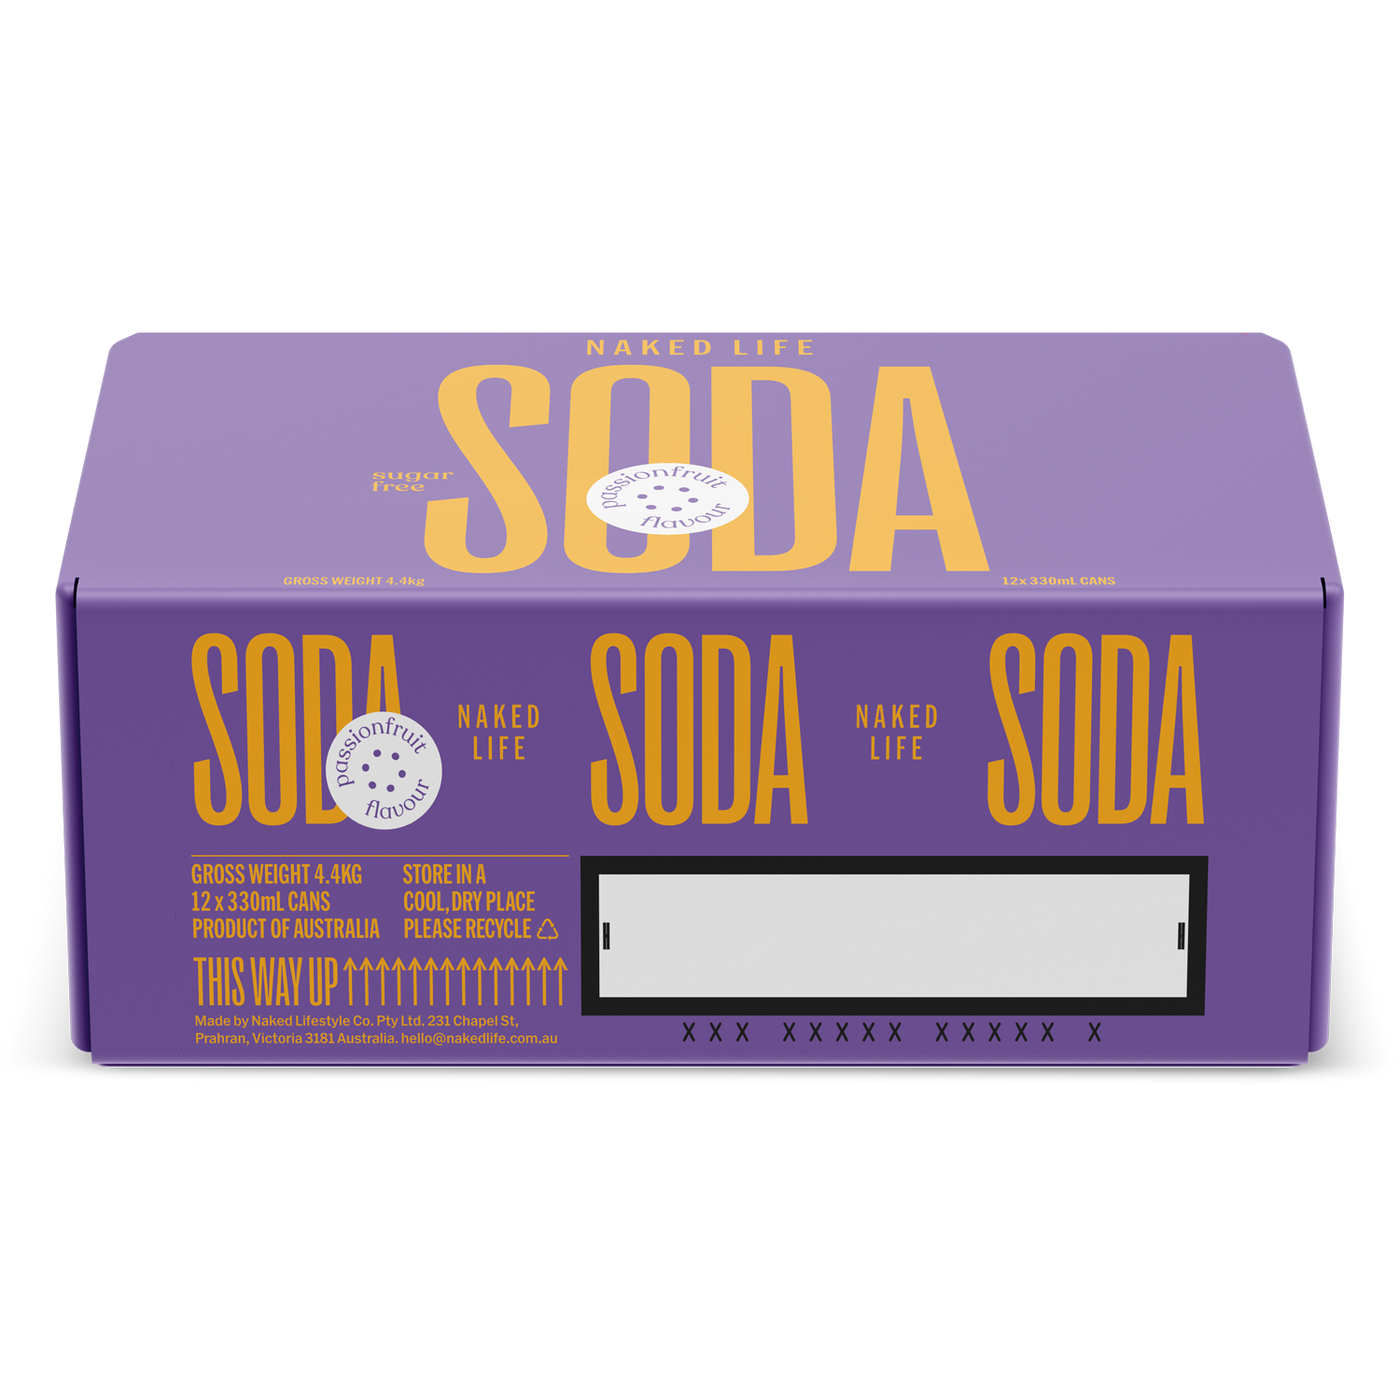 Sugar Free Passionfruit Soda 12 x 330ml Cans